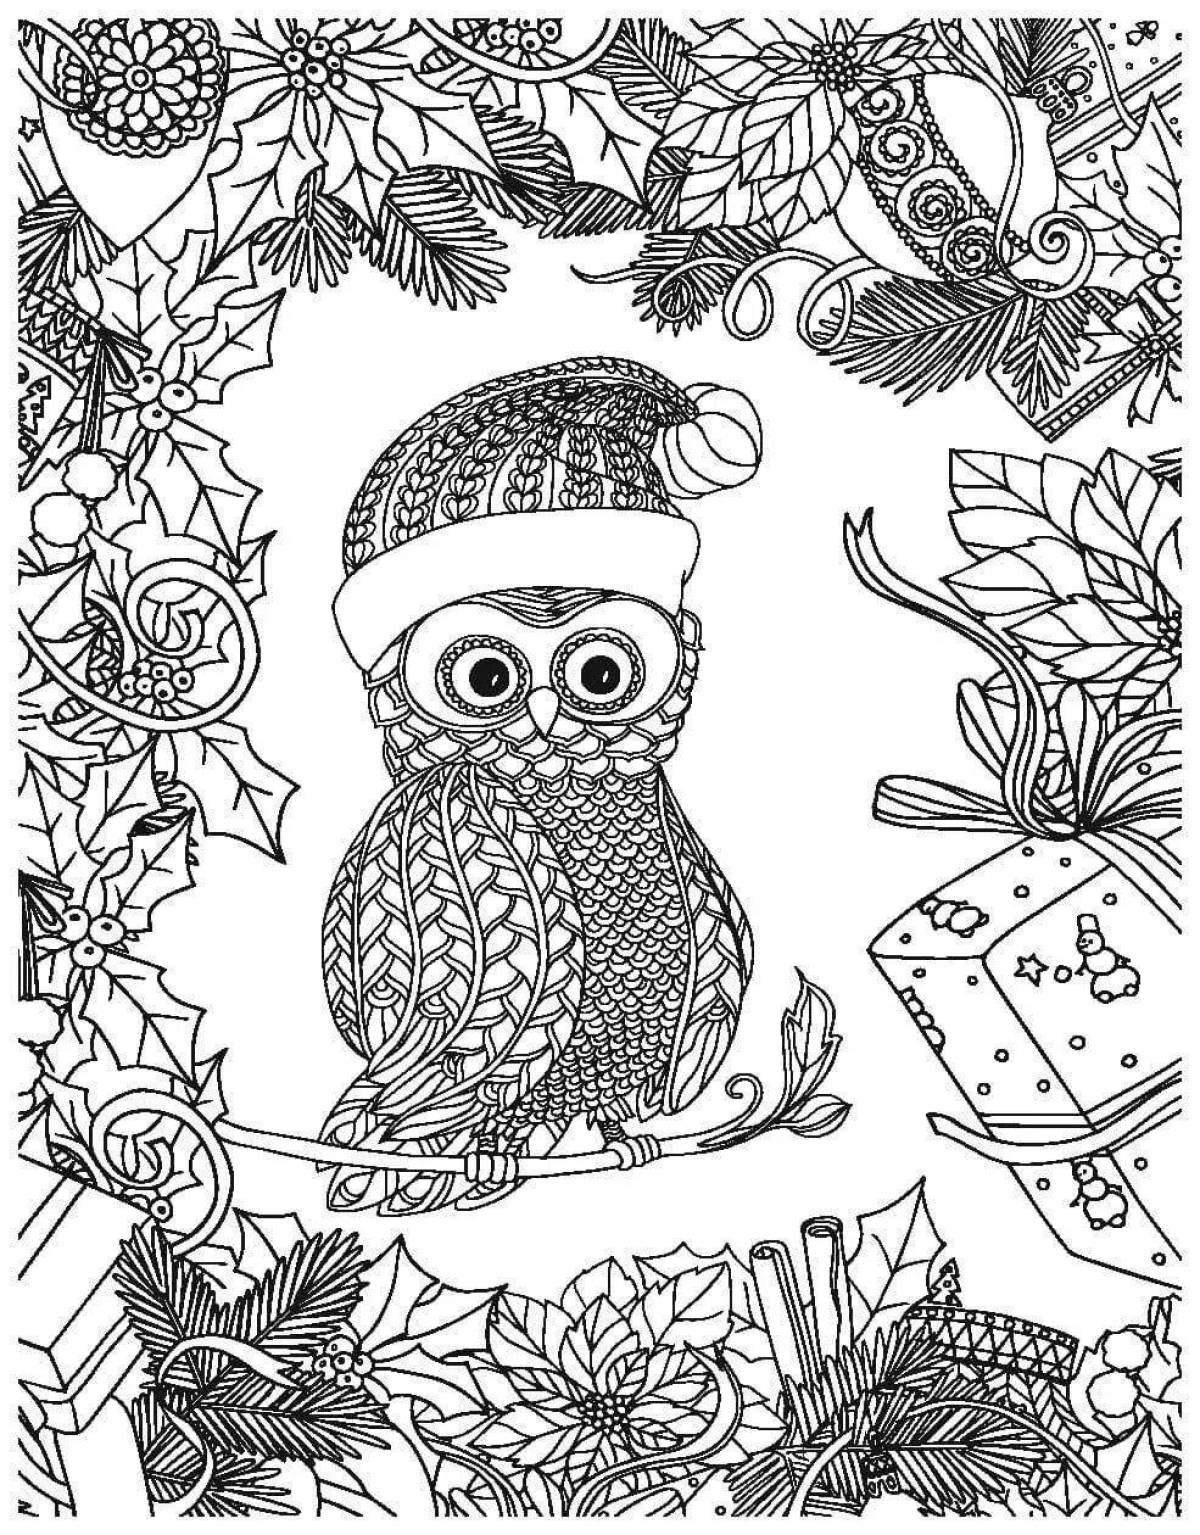 Live winter anti-stress coloring book for kids